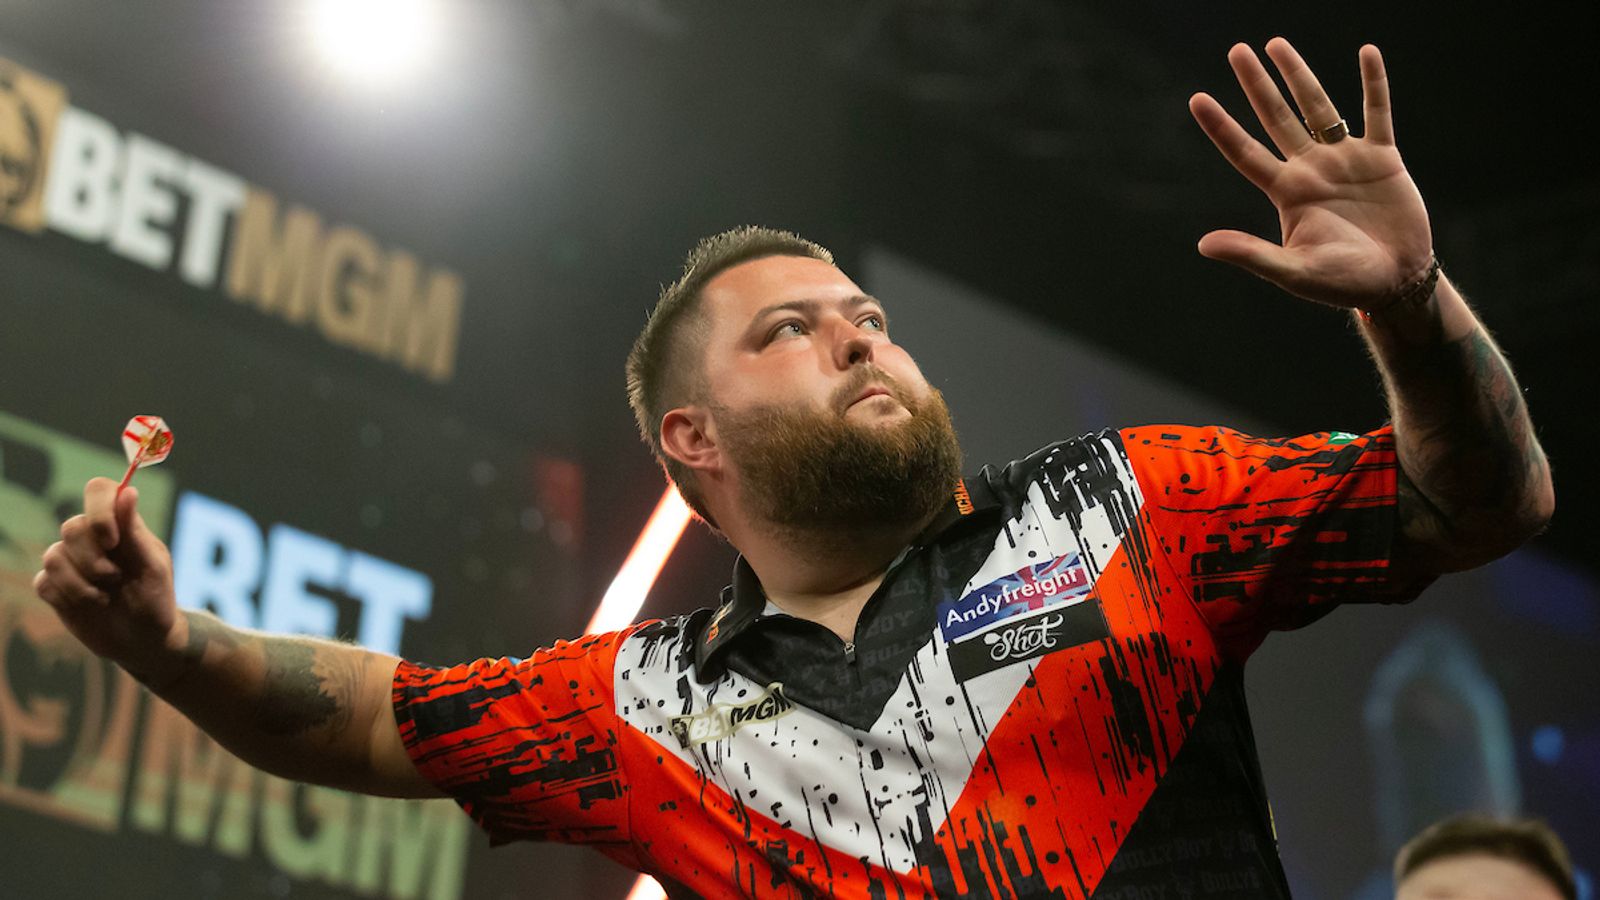 Premier League Darts: Michael Smith clinches play-off spot and takes nightly victory against Luke Humphries in Sheffield | Darts News